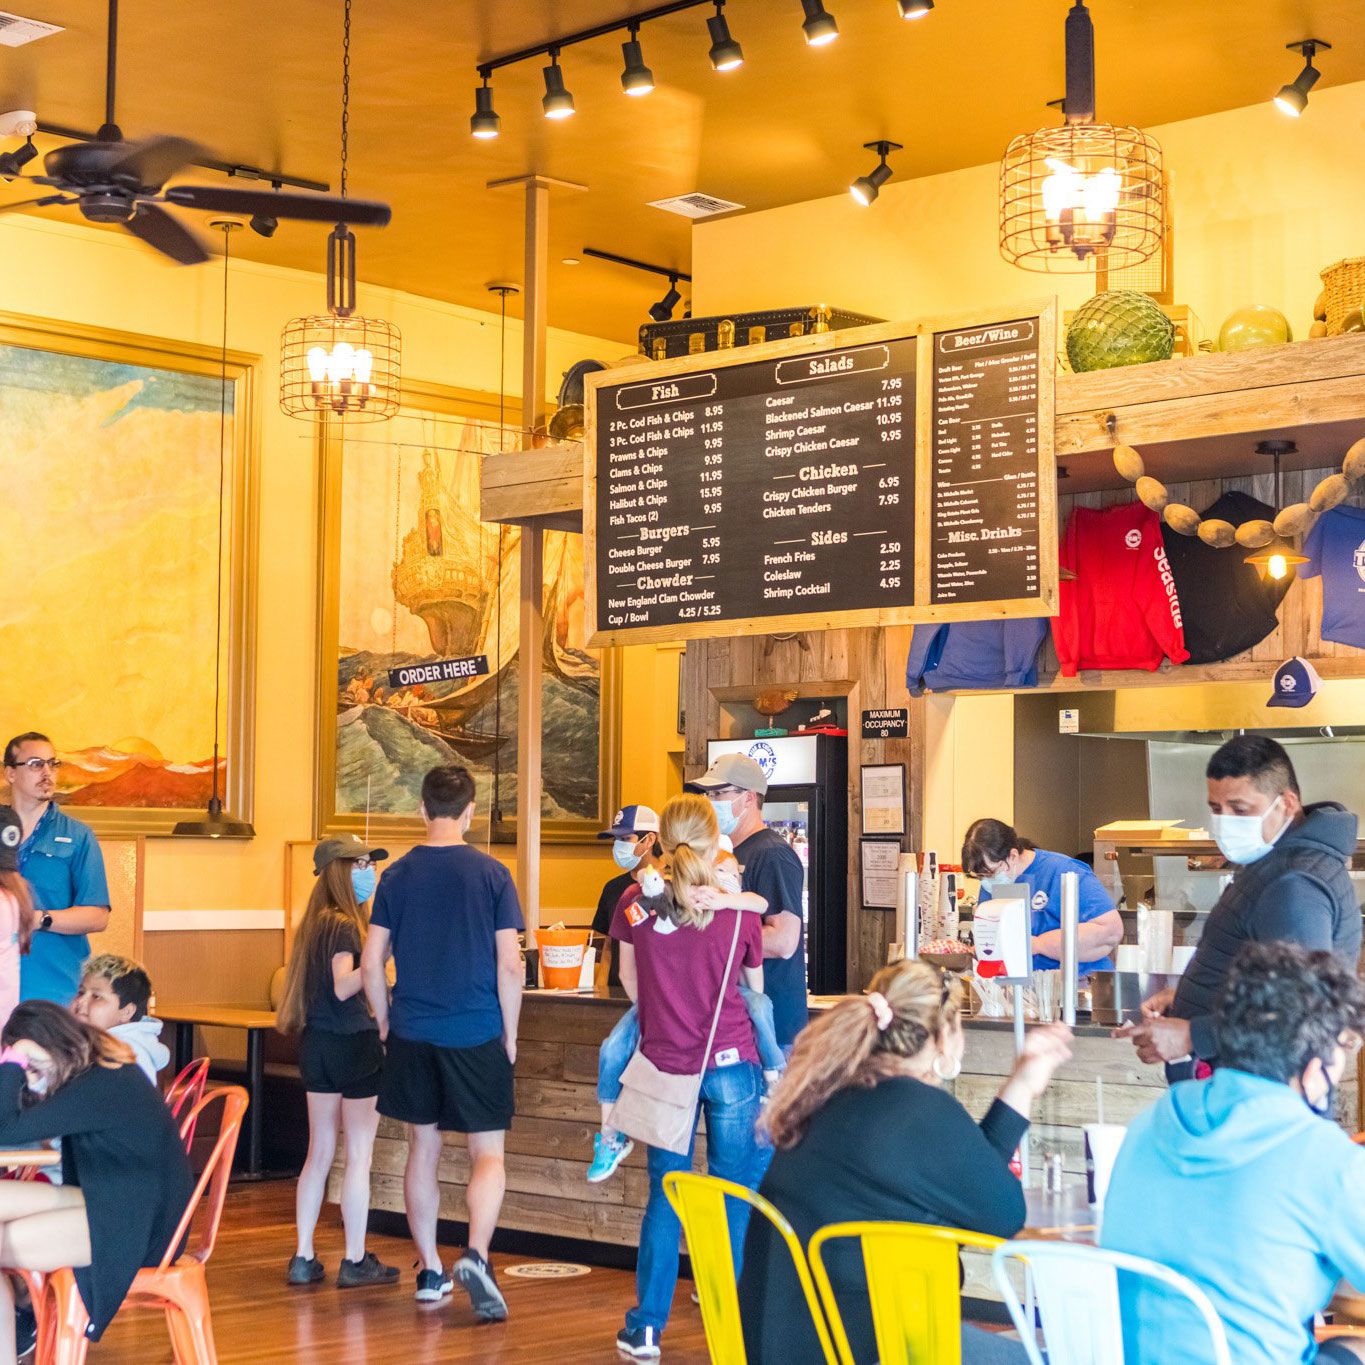 Where to Eat in Seaside, Oregon